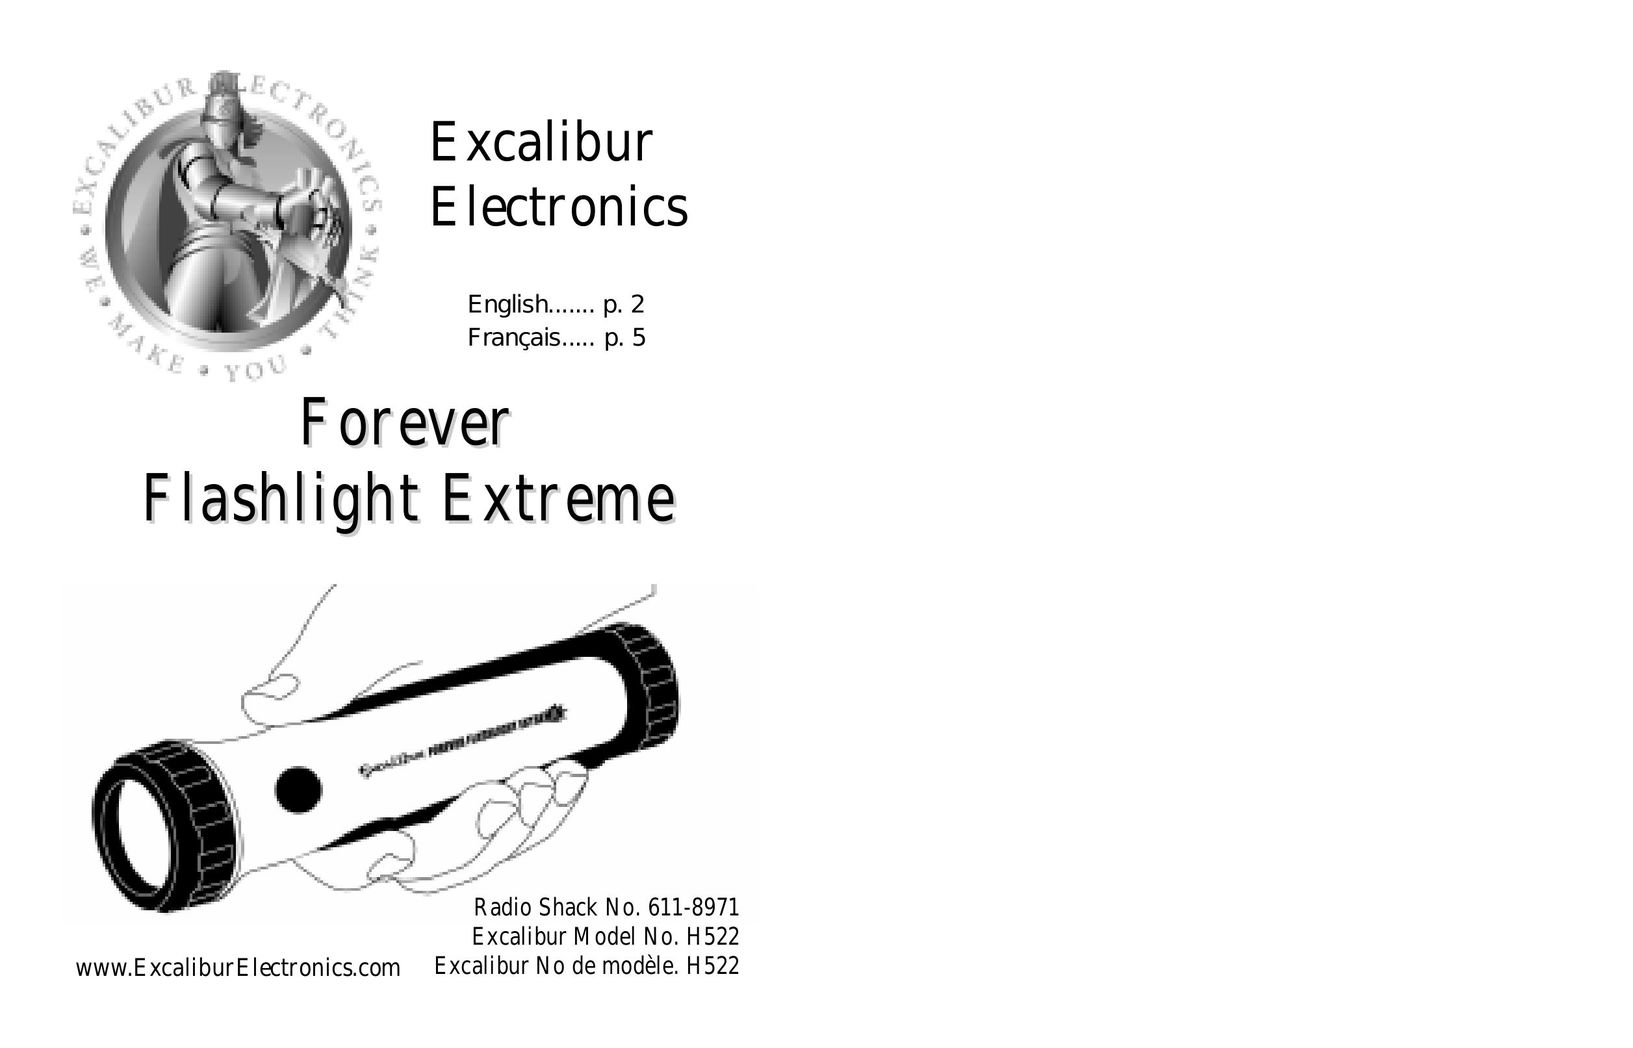 Excalibur electronic H522 Home Safety Product User Manual